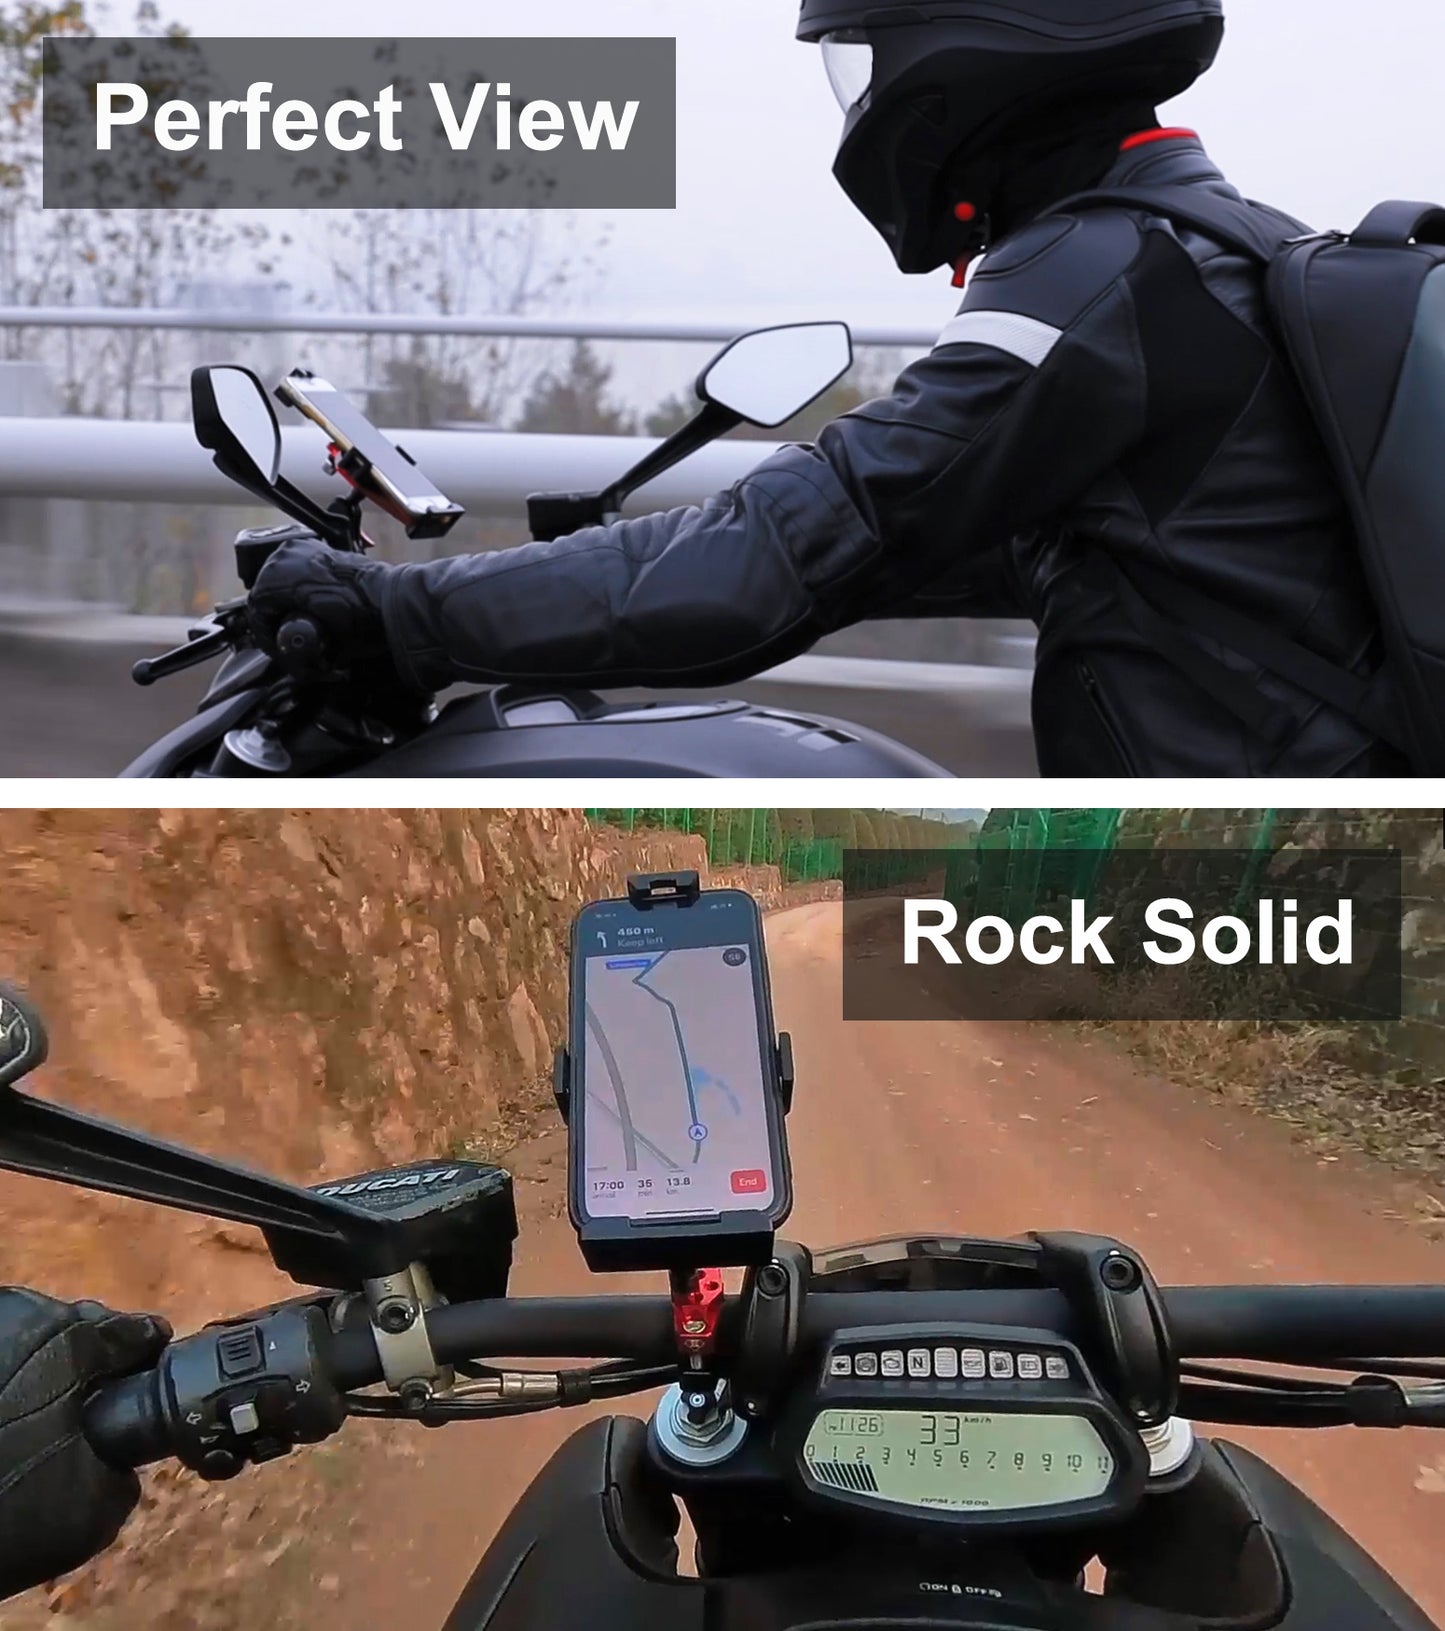 All Metal Motorcycle Phone Mount (Red)